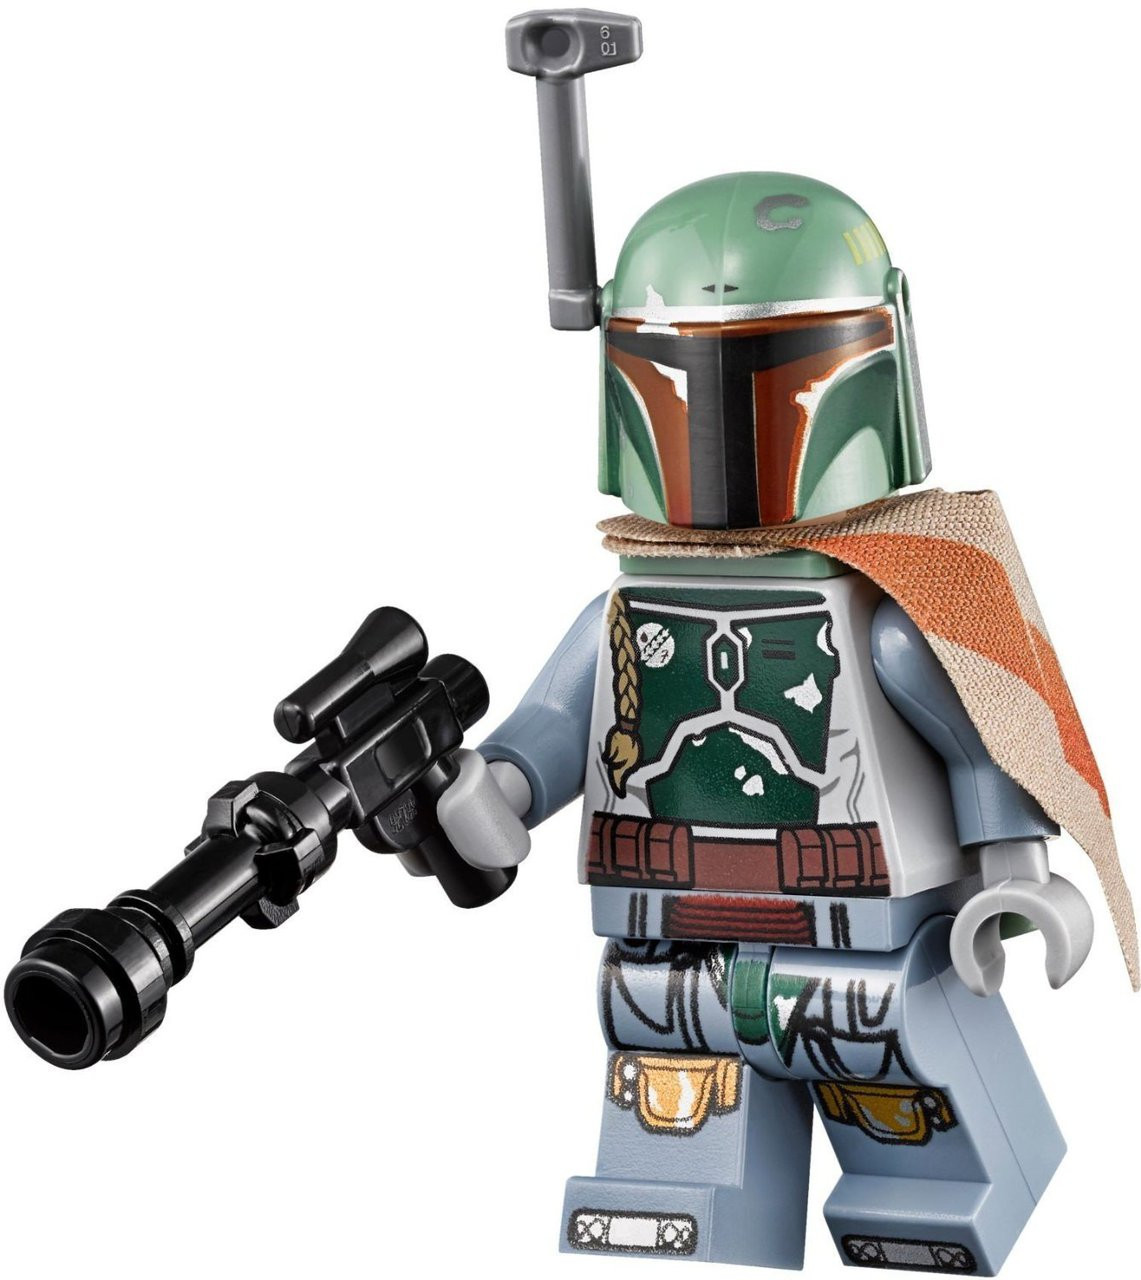 Download LEGO® Star Wars™ Boba Fett with Blaster - from 75137 - The Brick People